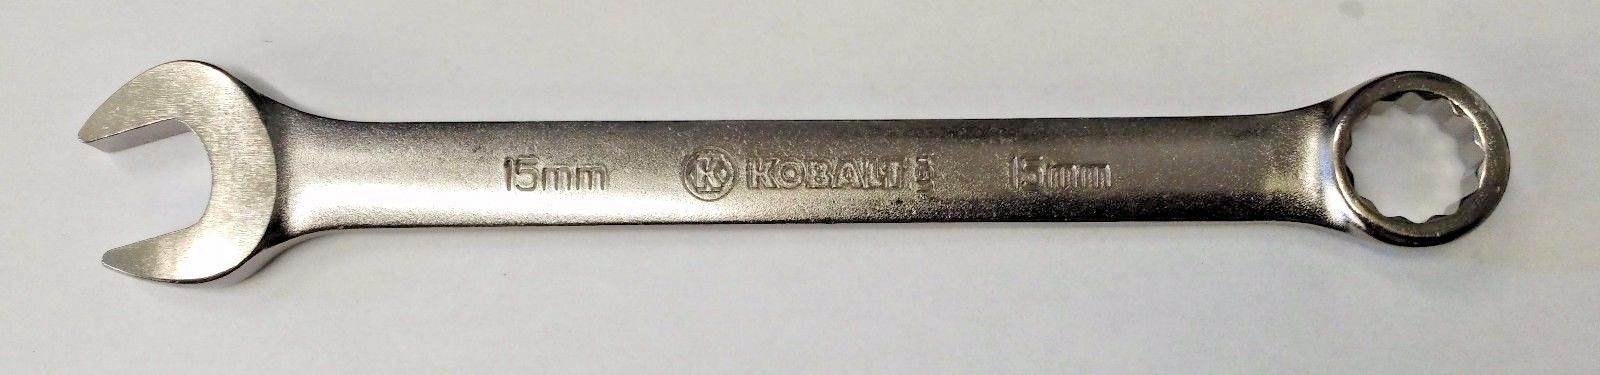 Kobalt 15MM Combination Wrench 22915 12 Point USA